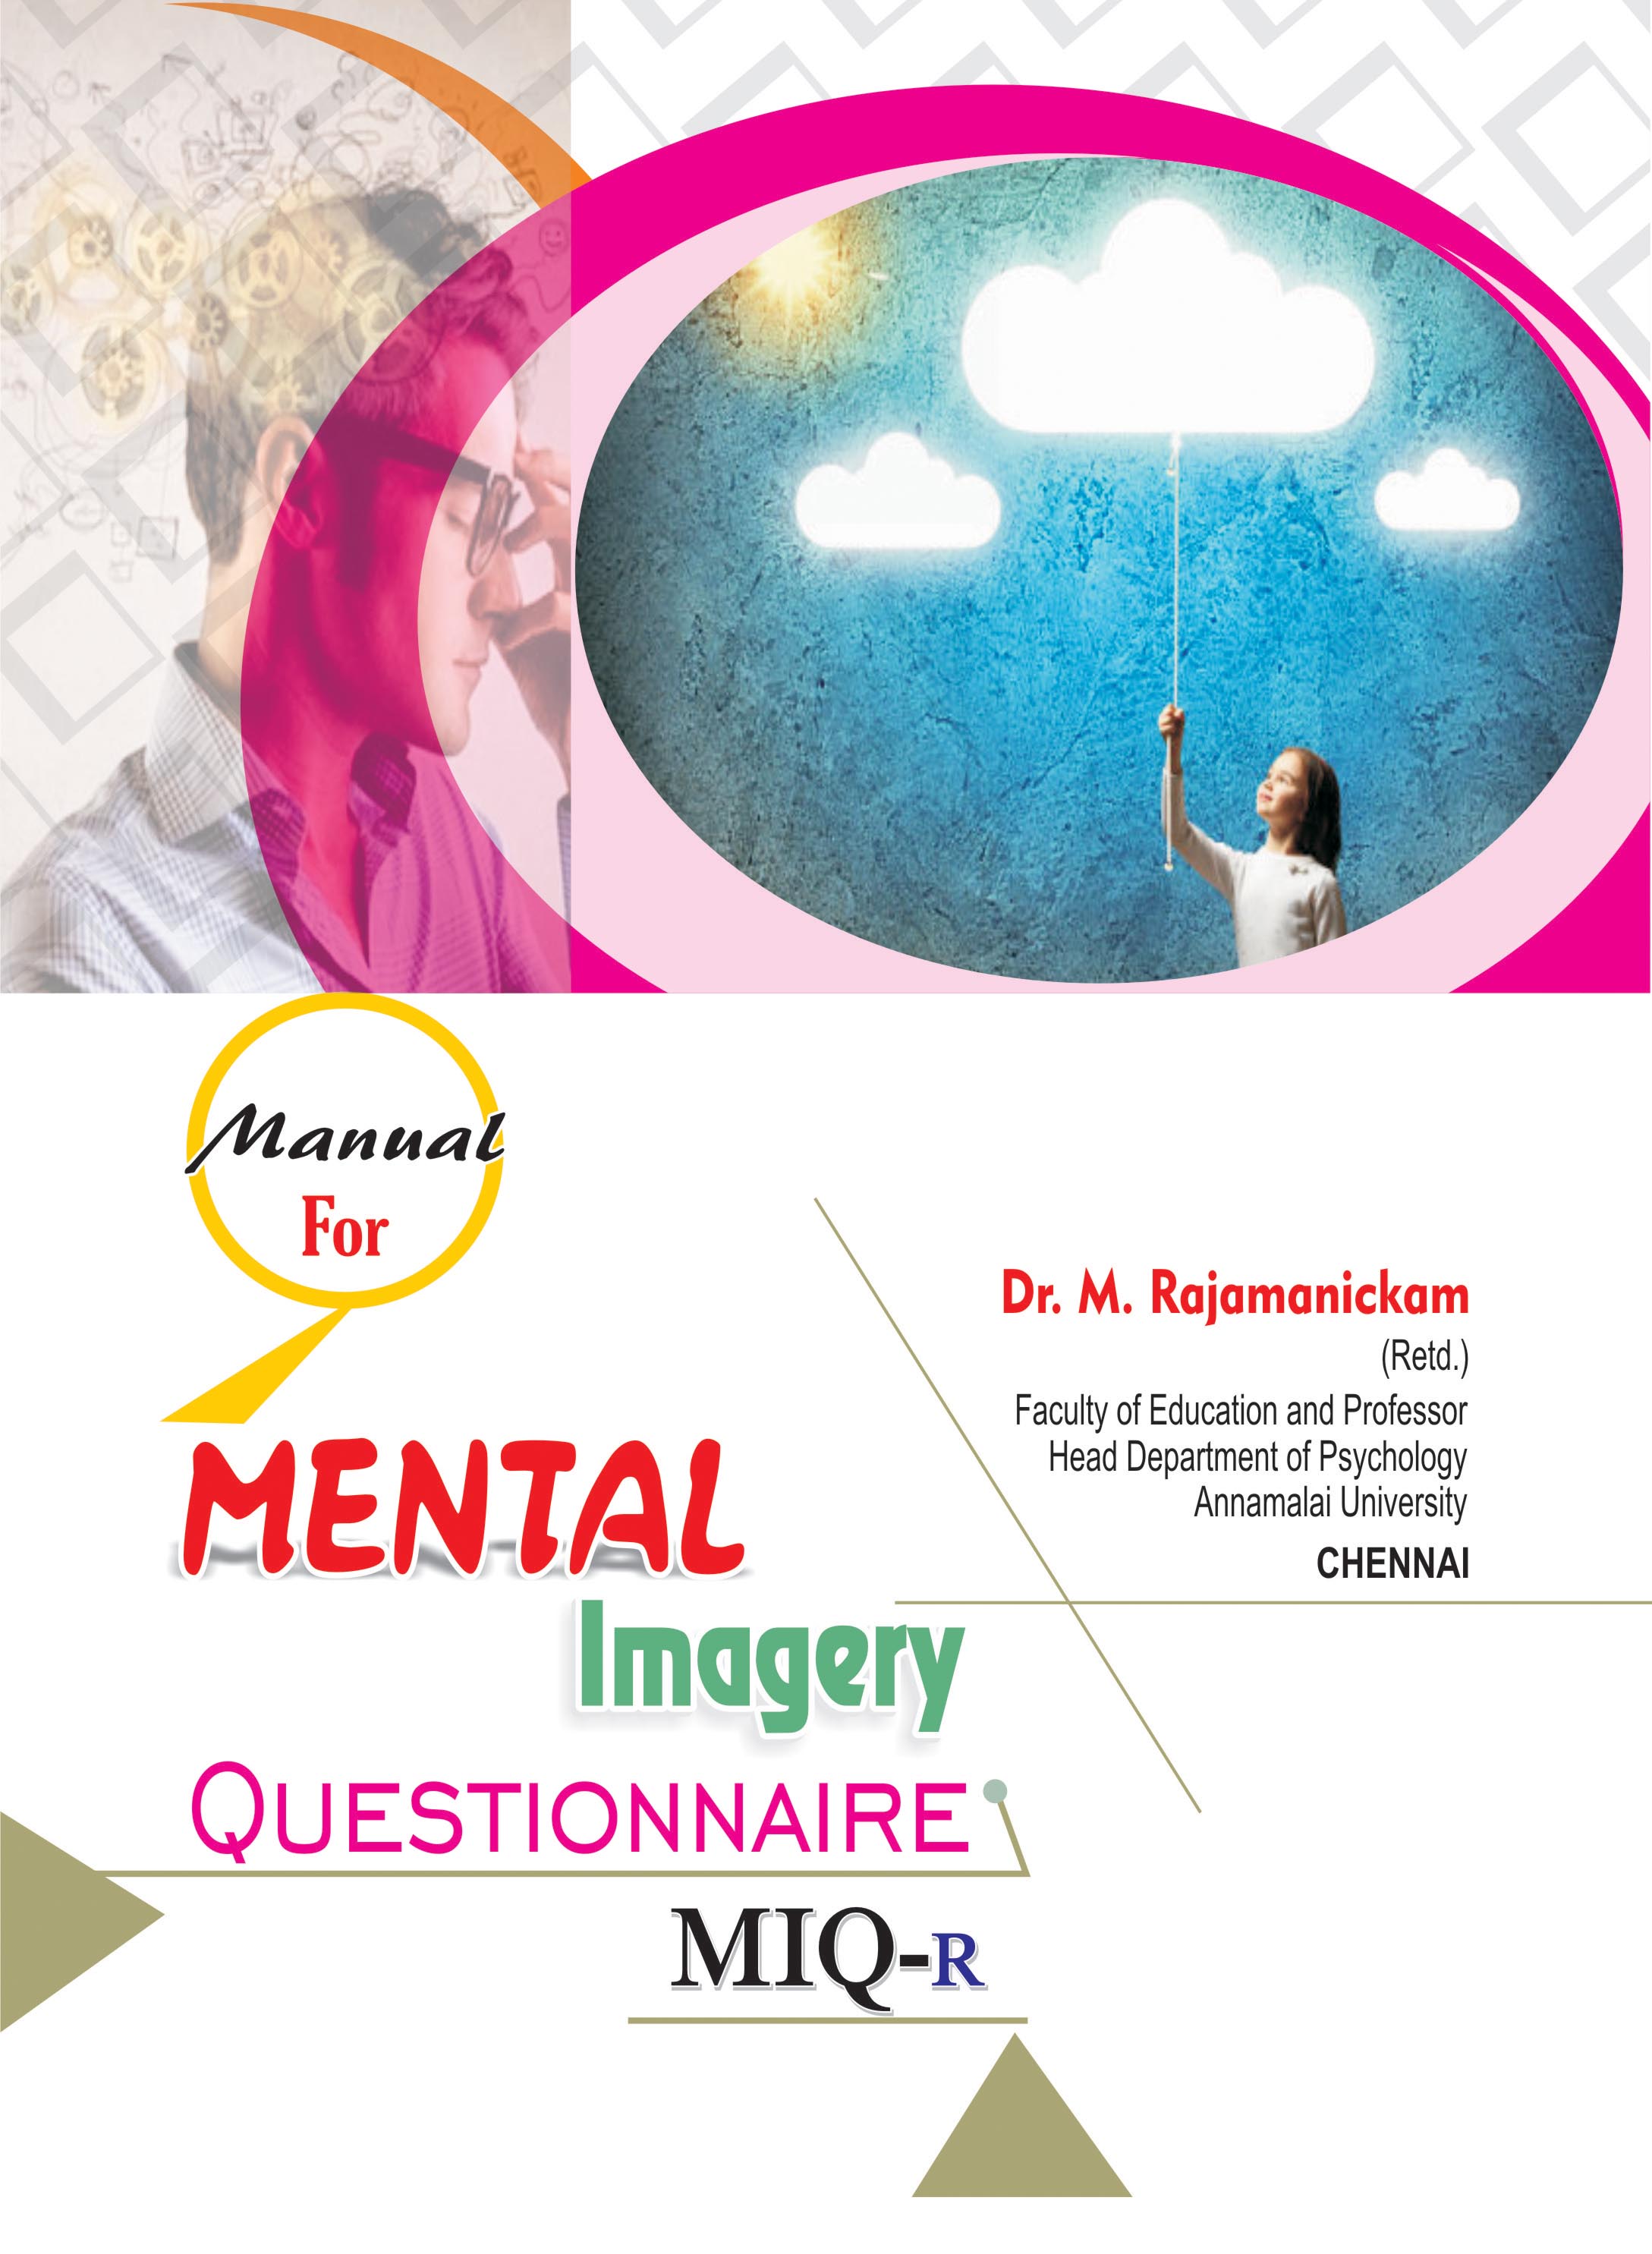 MENTAL-IMAGERY-QUESTIONNAIRE-